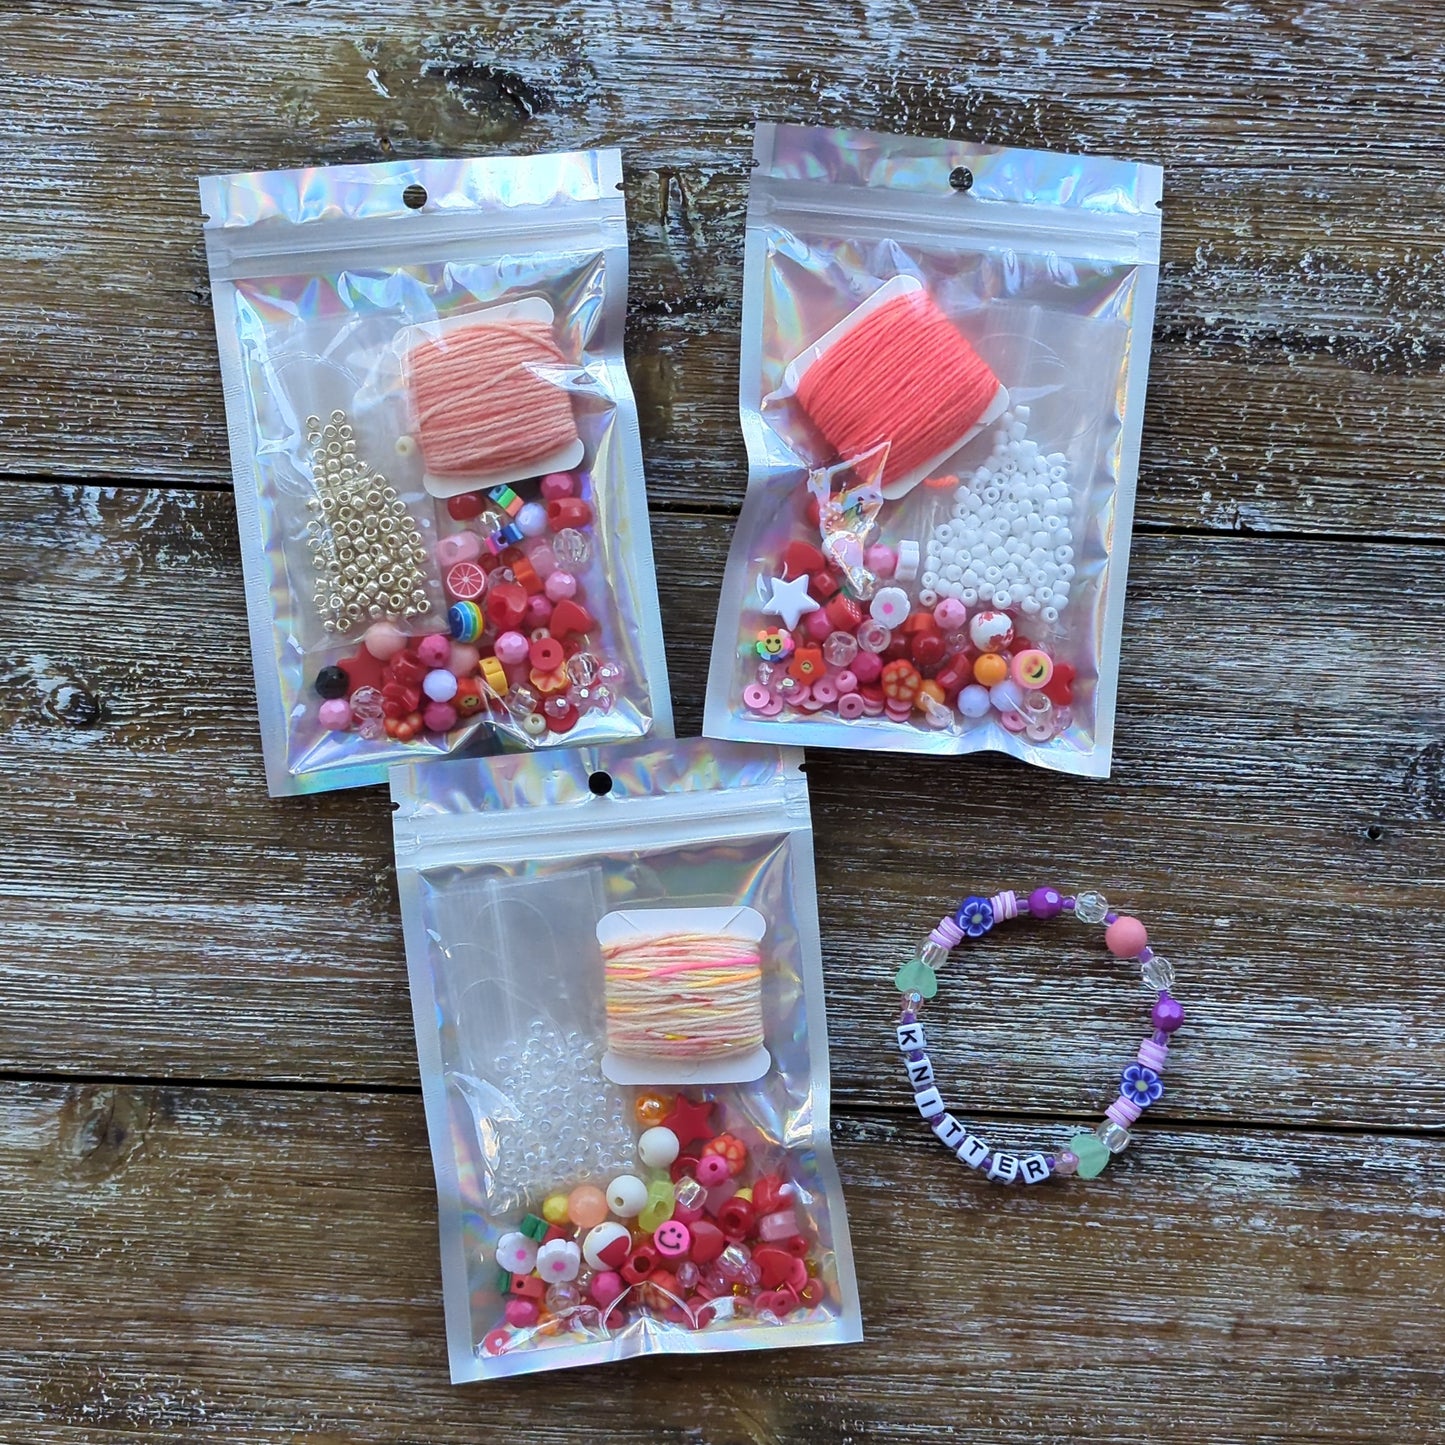 Friendship Bracelet Kits - Choose Your Own Words! - Ready to Ship